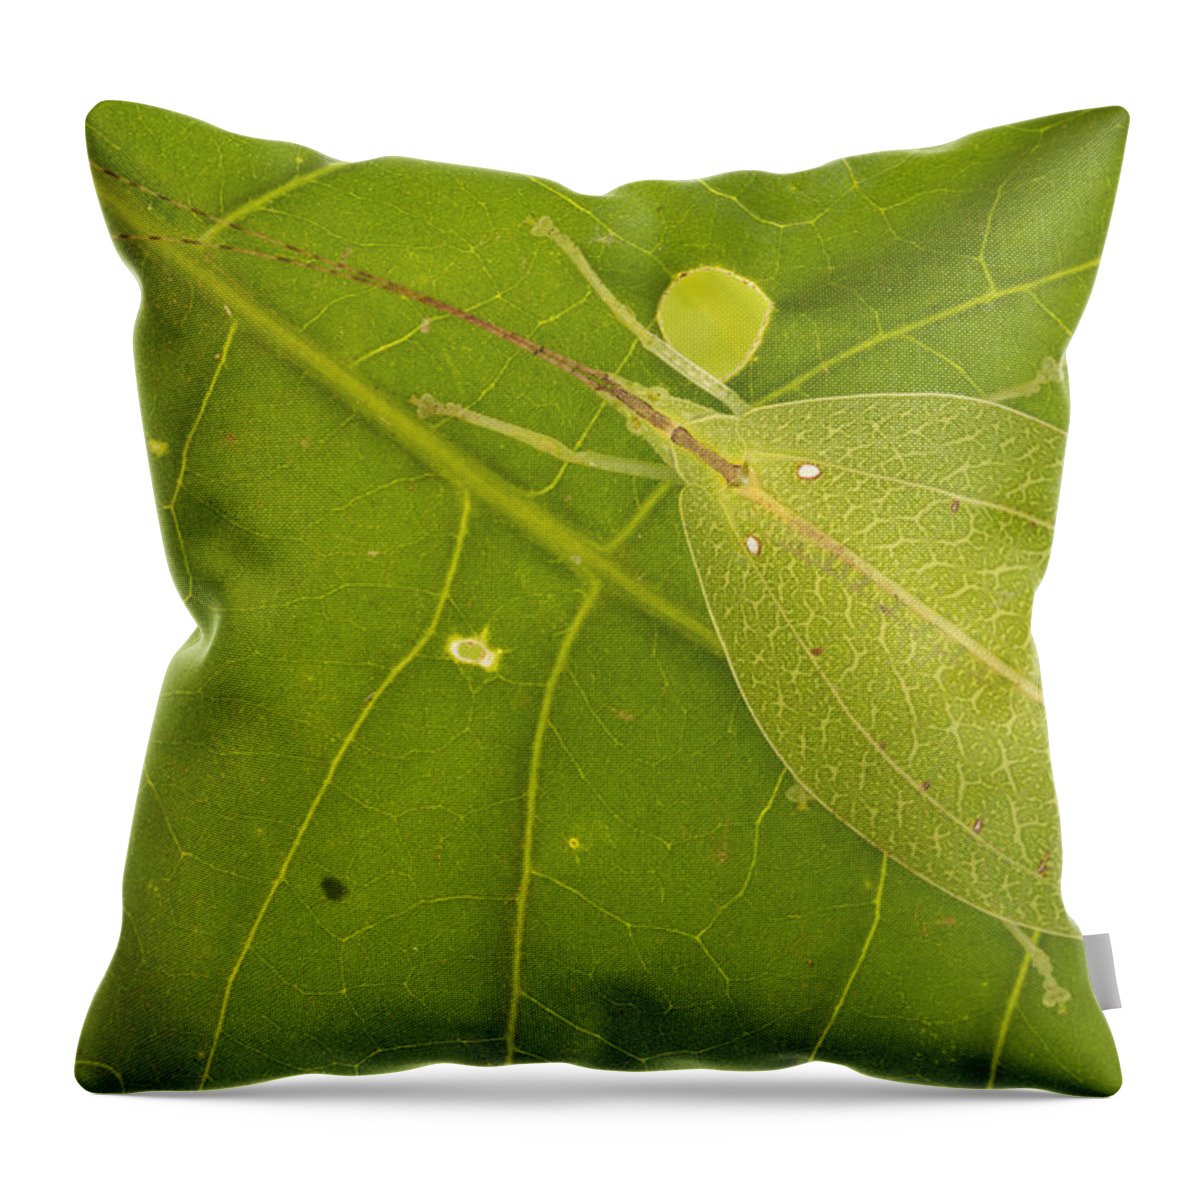 496641 Throw Pillow featuring the photograph Camouflaged Katydid Gorongosa Mozambique by Piotr Naskrecki